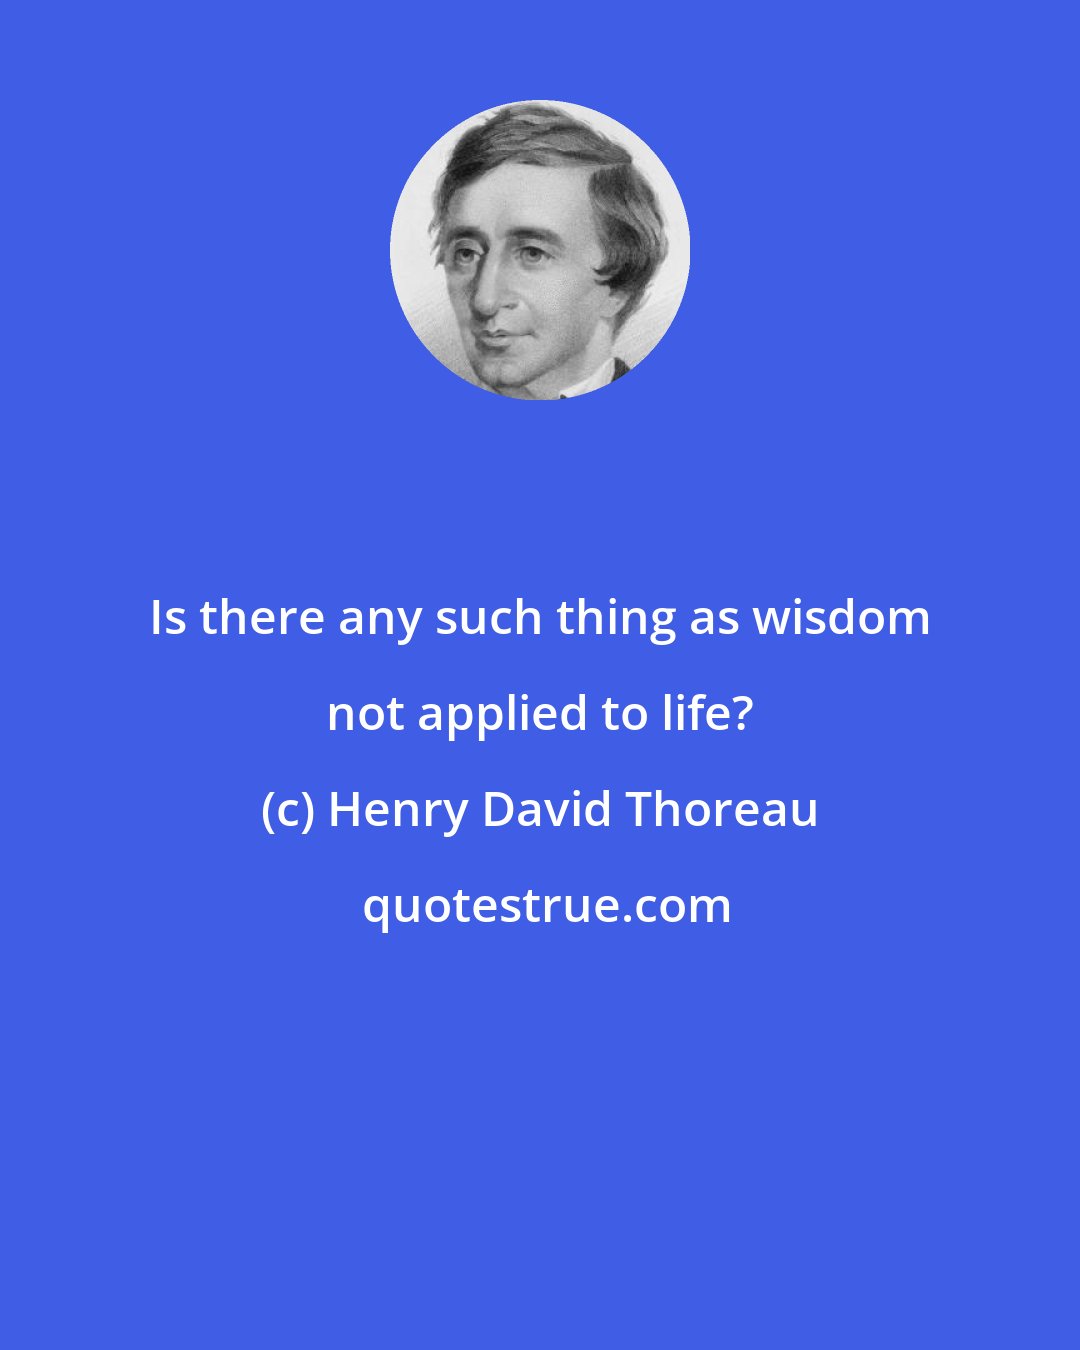 Henry David Thoreau: Is there any such thing as wisdom not applied to life?